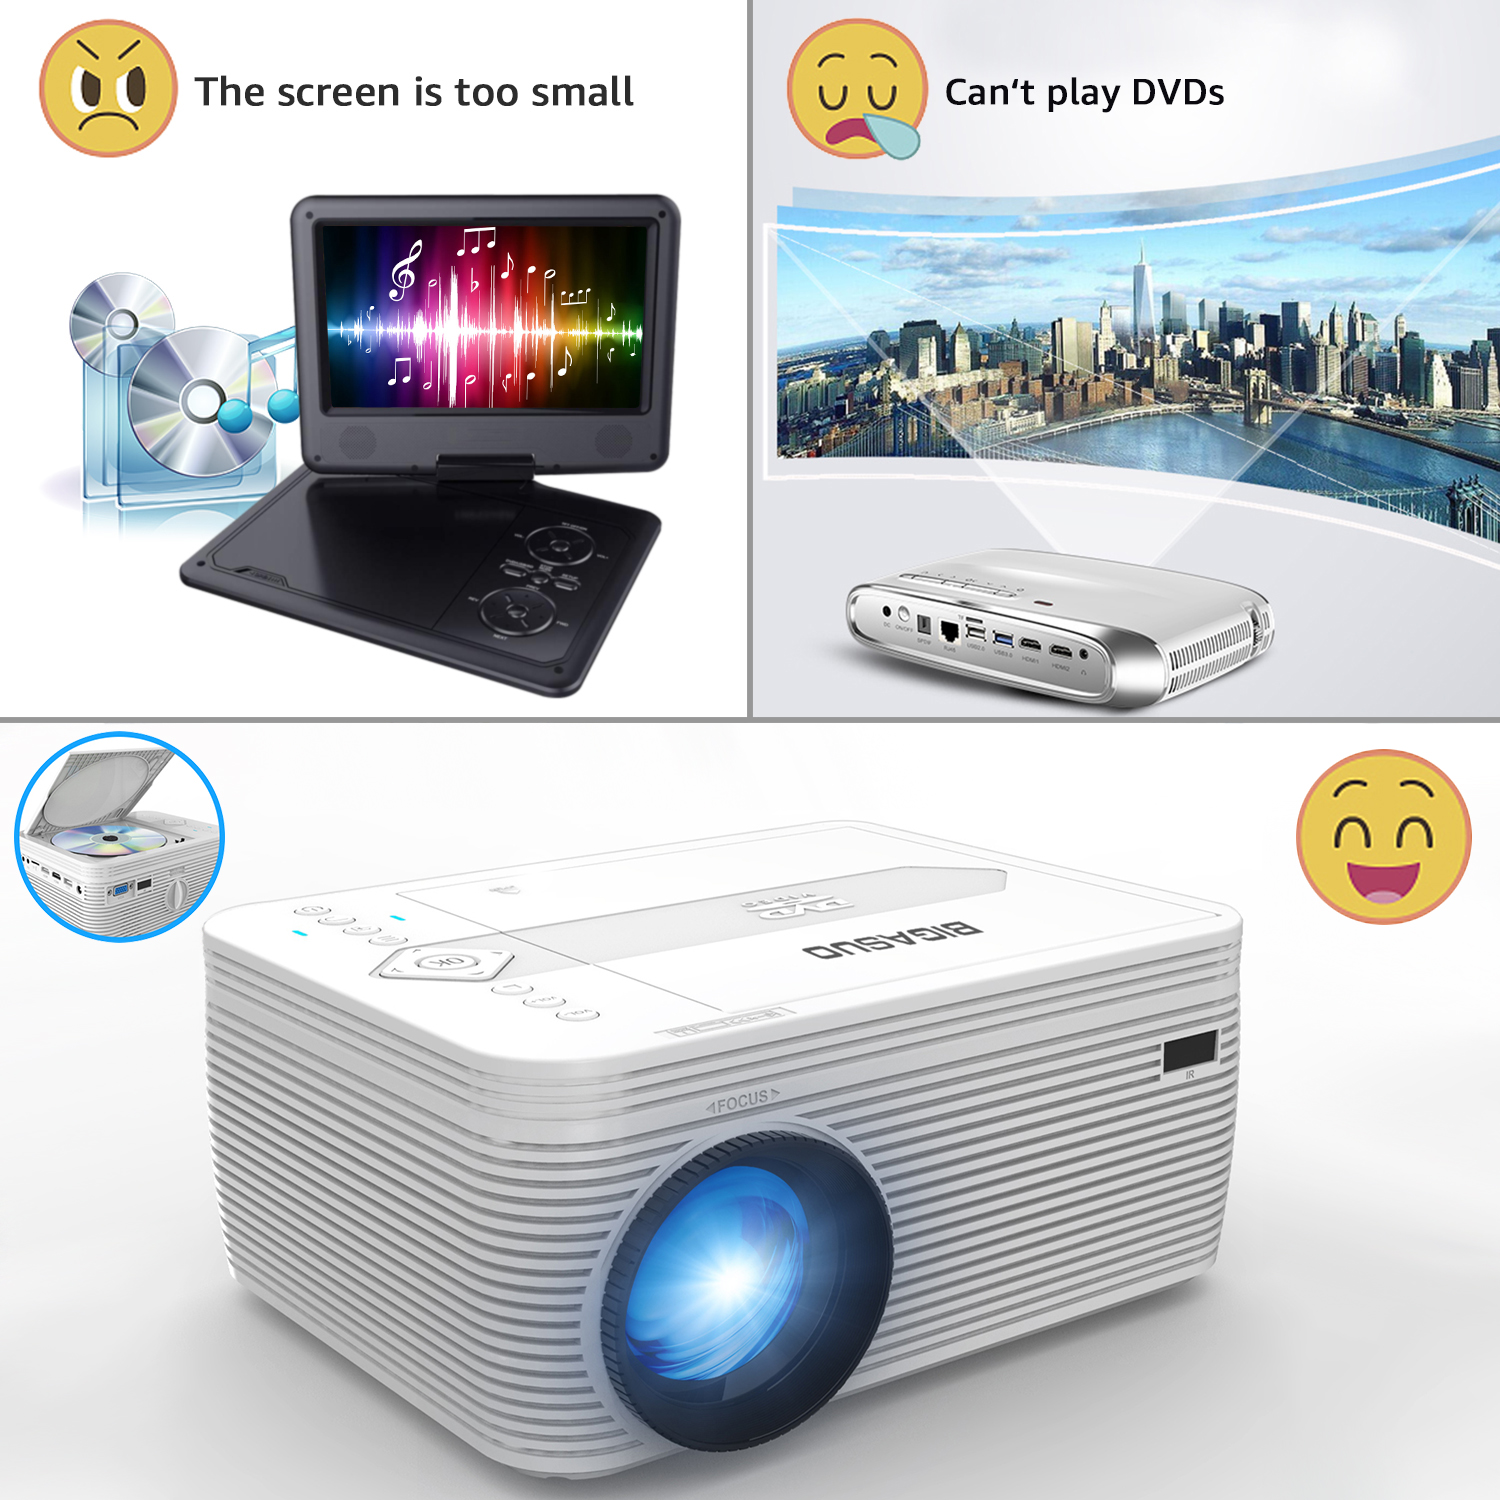 BIGASUO Projector Native 720P, Portable Support 1080P Projector with 55000 Hours Lamp Life, Built in DVD Player, Ideal for Home Theater - image 2 of 6